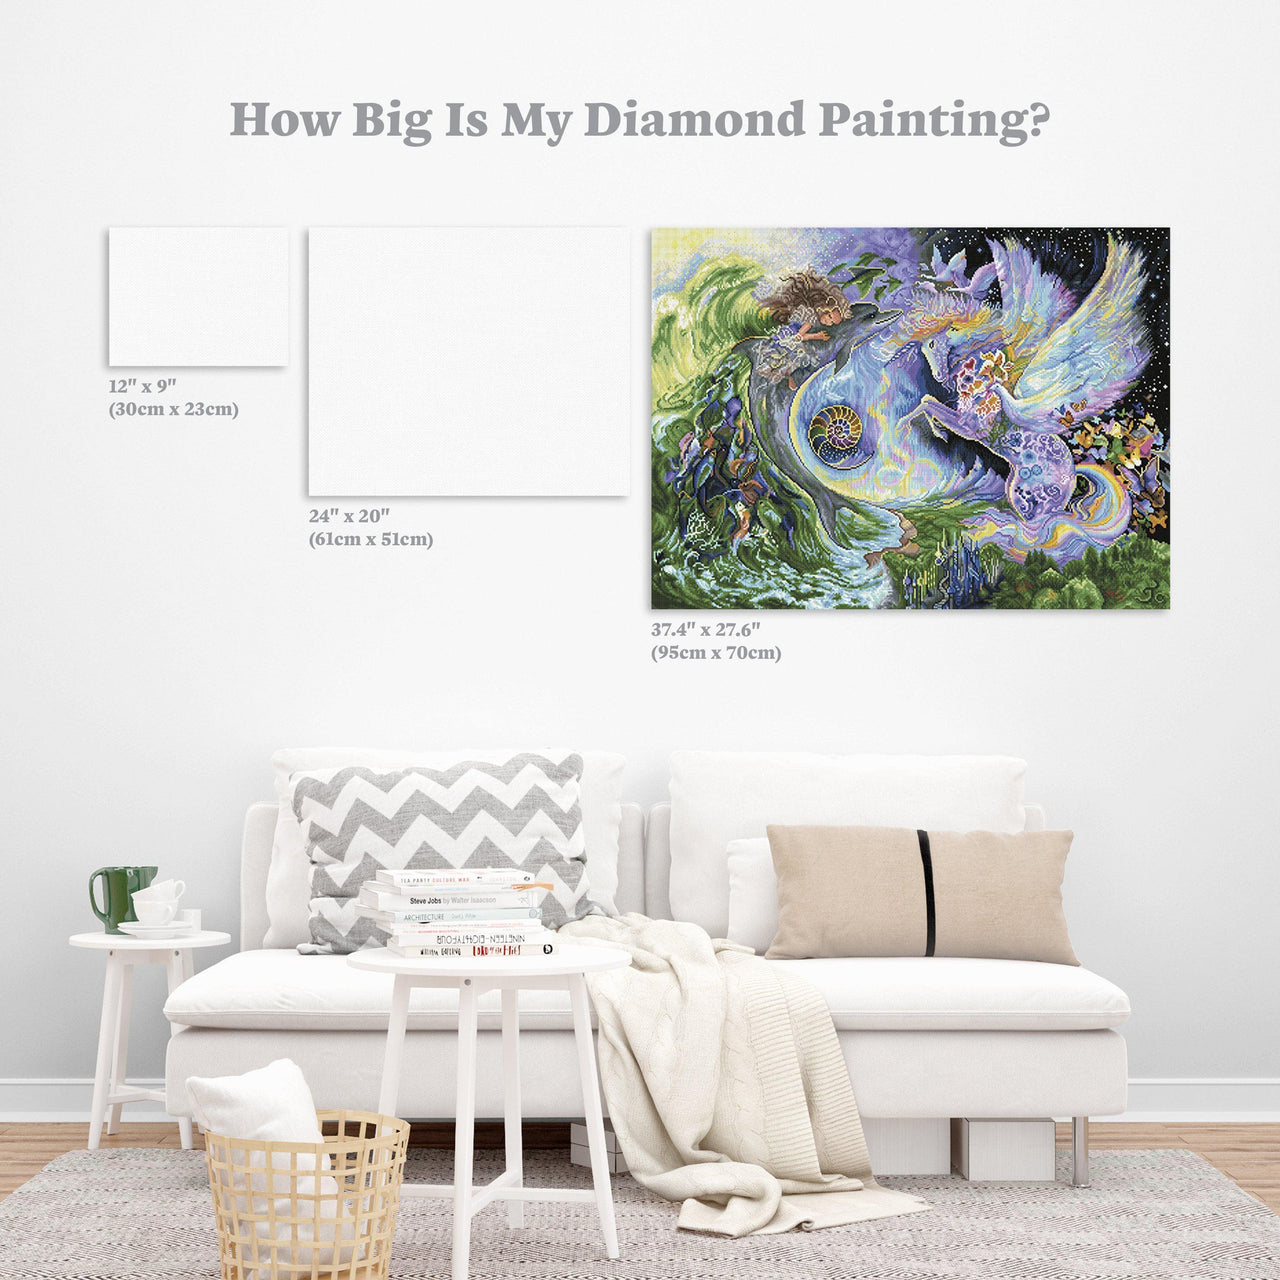 Diamond Painting Magical Meeting 37.4" x 27.6″ (95cm x 70cm) / Square with 61 Colors including 4 ABs / 104,427